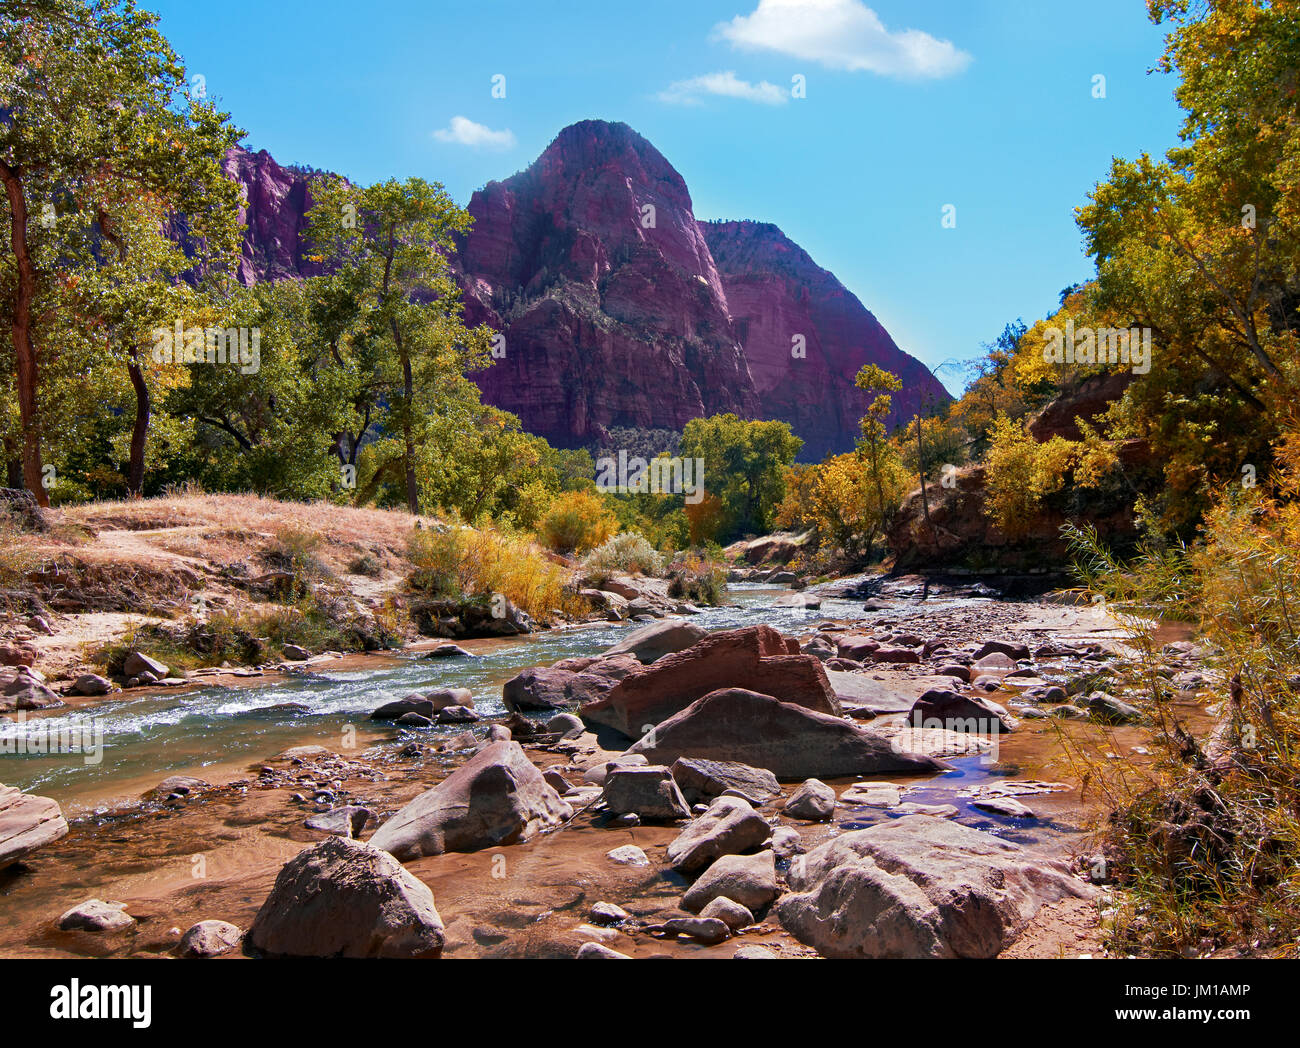 A view of the mountainous landscape of Zion National Park, Utah, USA Stock Photo